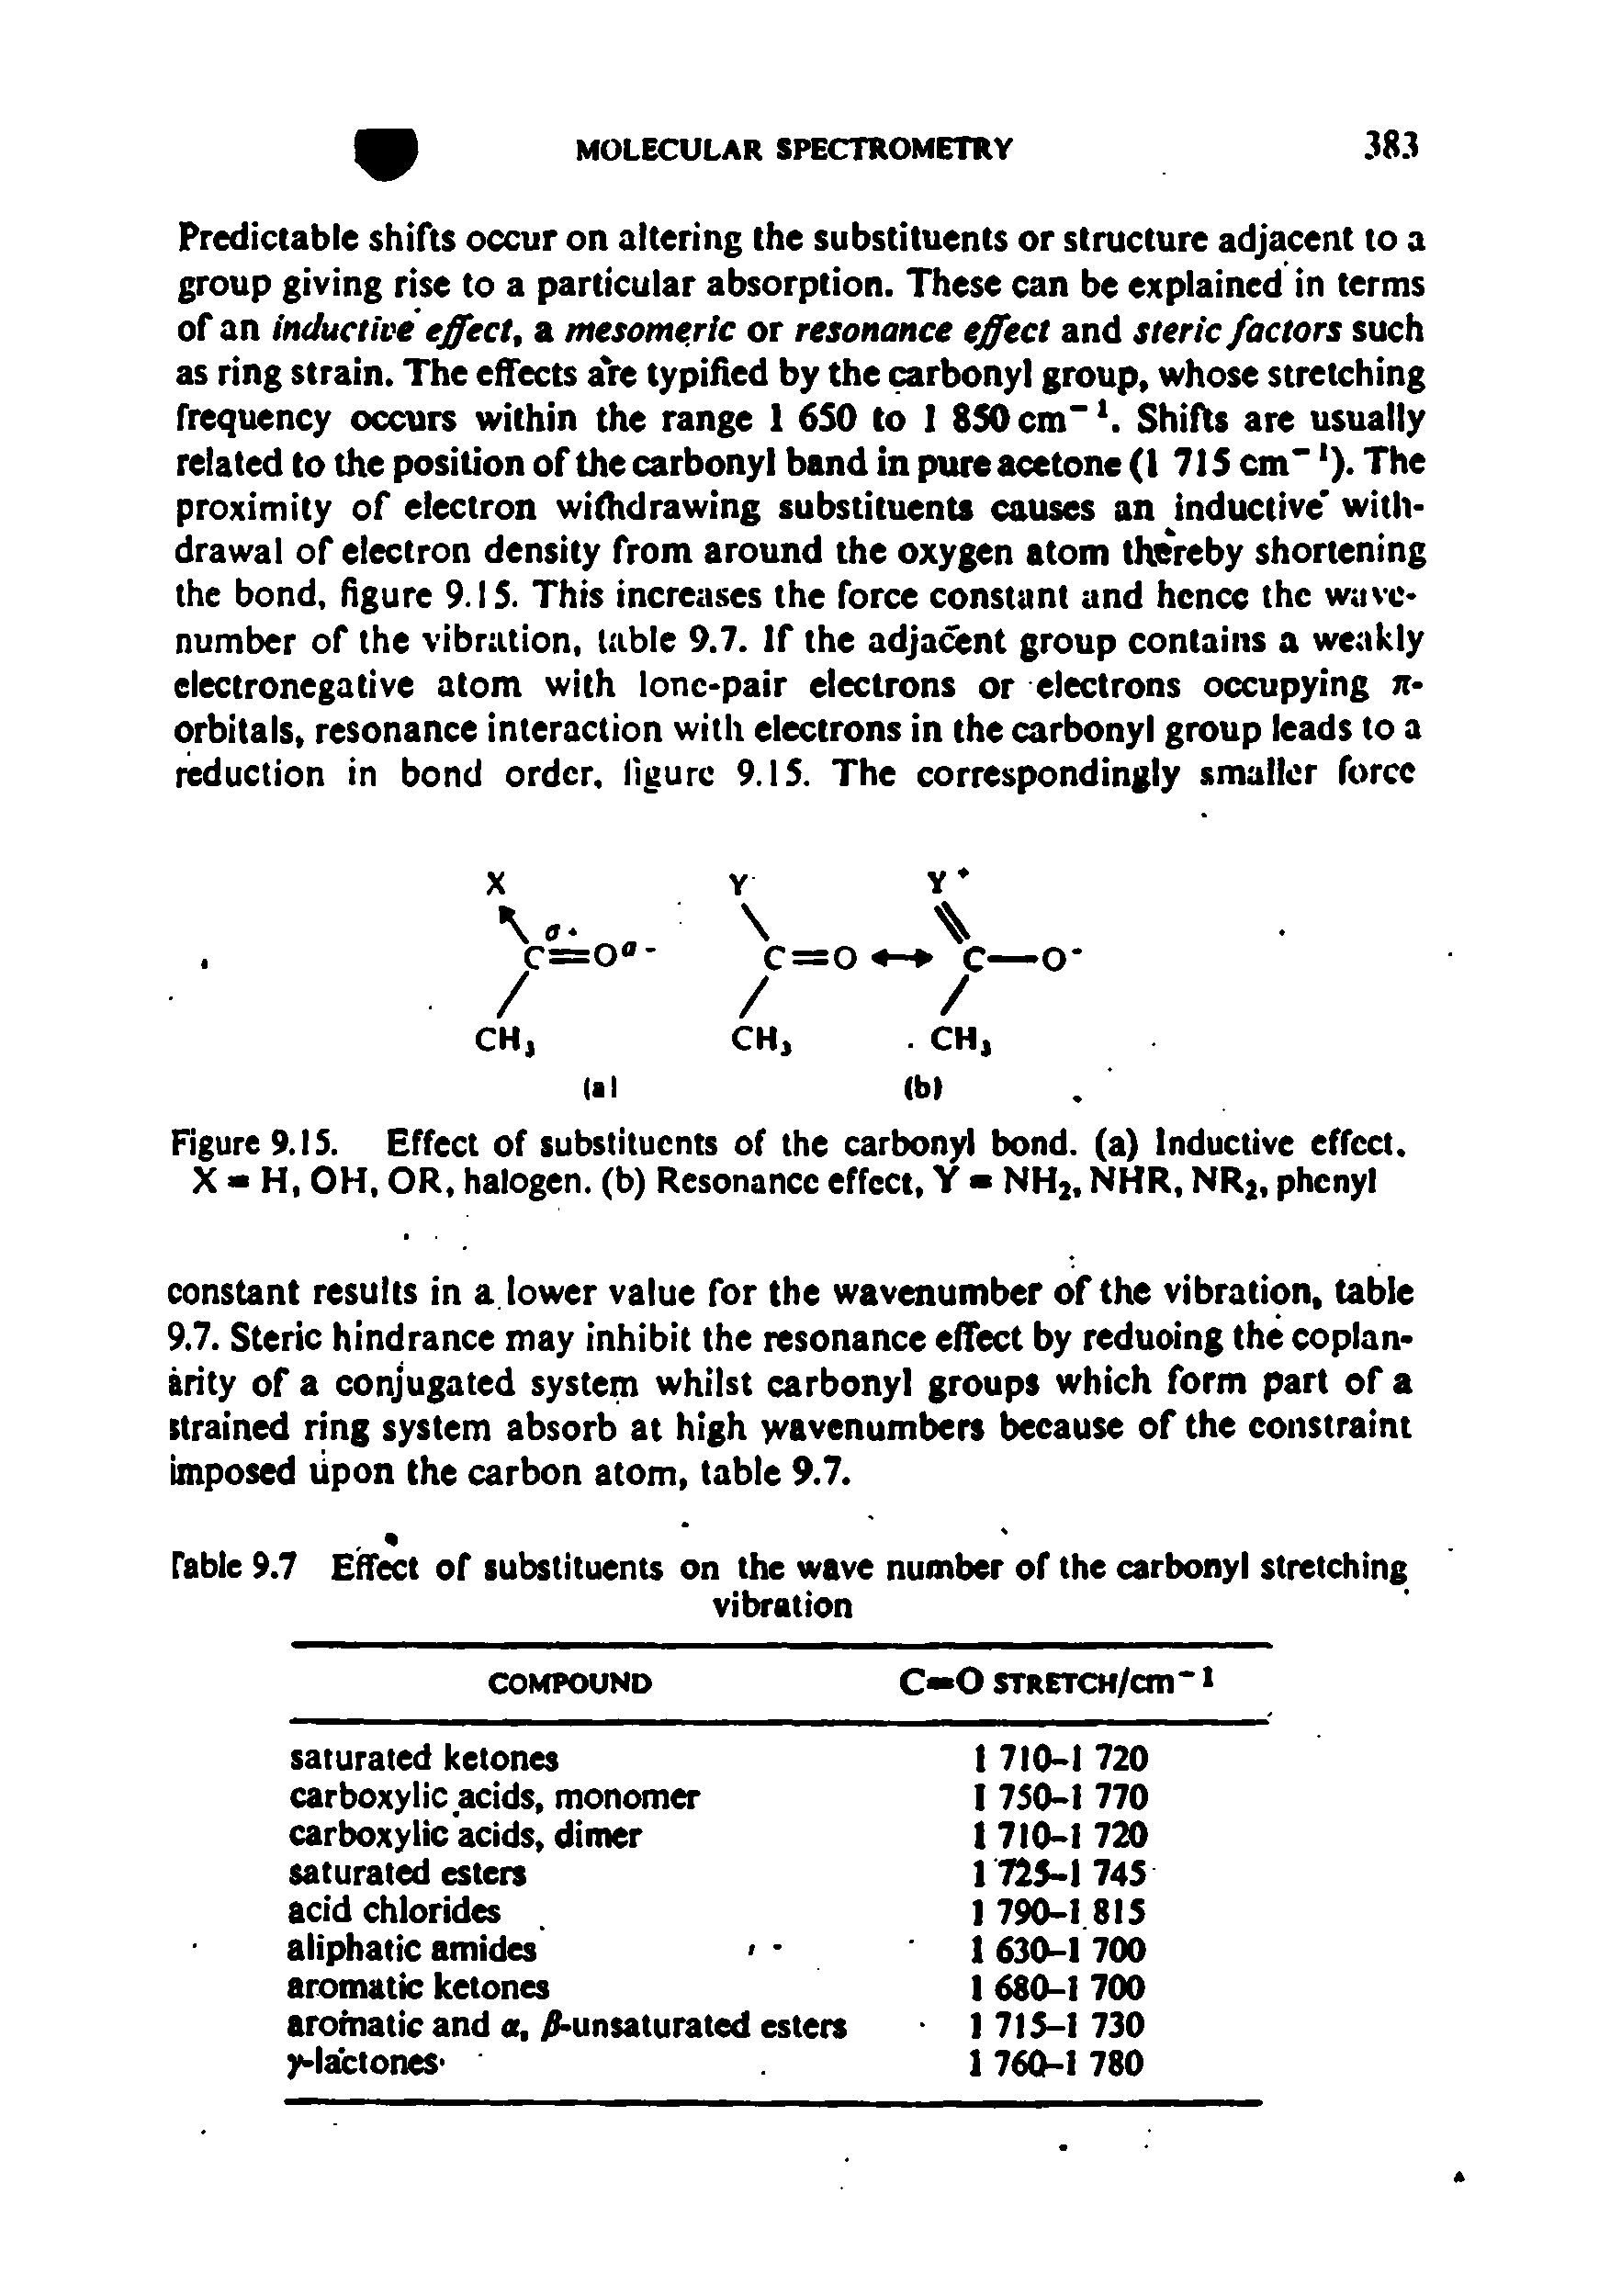 Figure 9.15. Effect of substituents of the carbonyl bond, (a) Inductive effect. X H, OH, OR, halogen, (b) Resonance effect, Y NH2, NHR, NRj, phenyl...